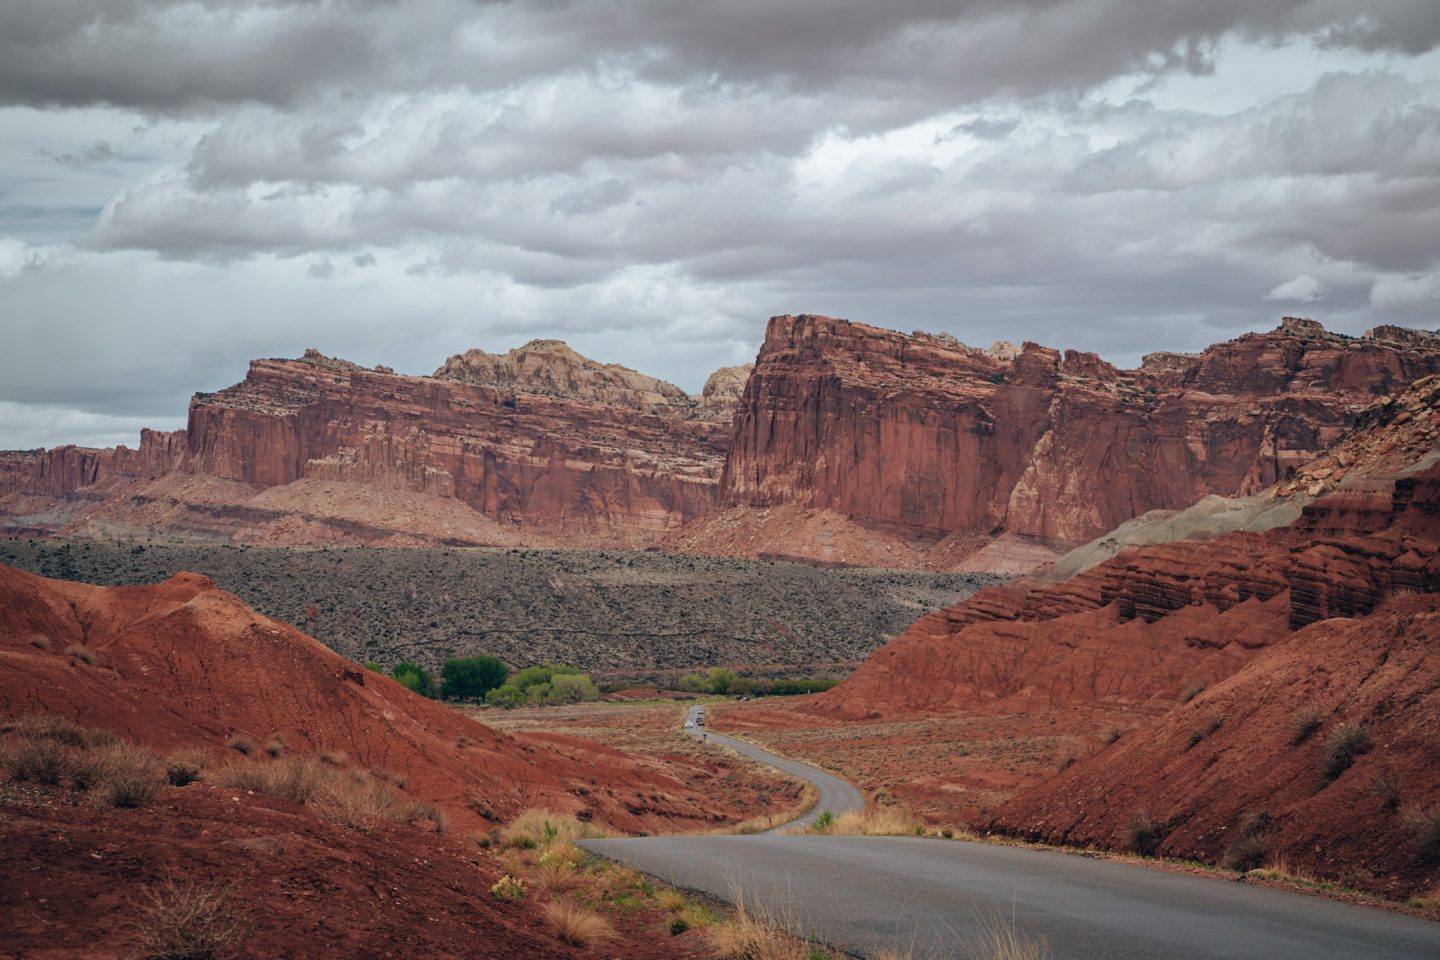 Capitol Reef National Park - soft adventure scenic drive